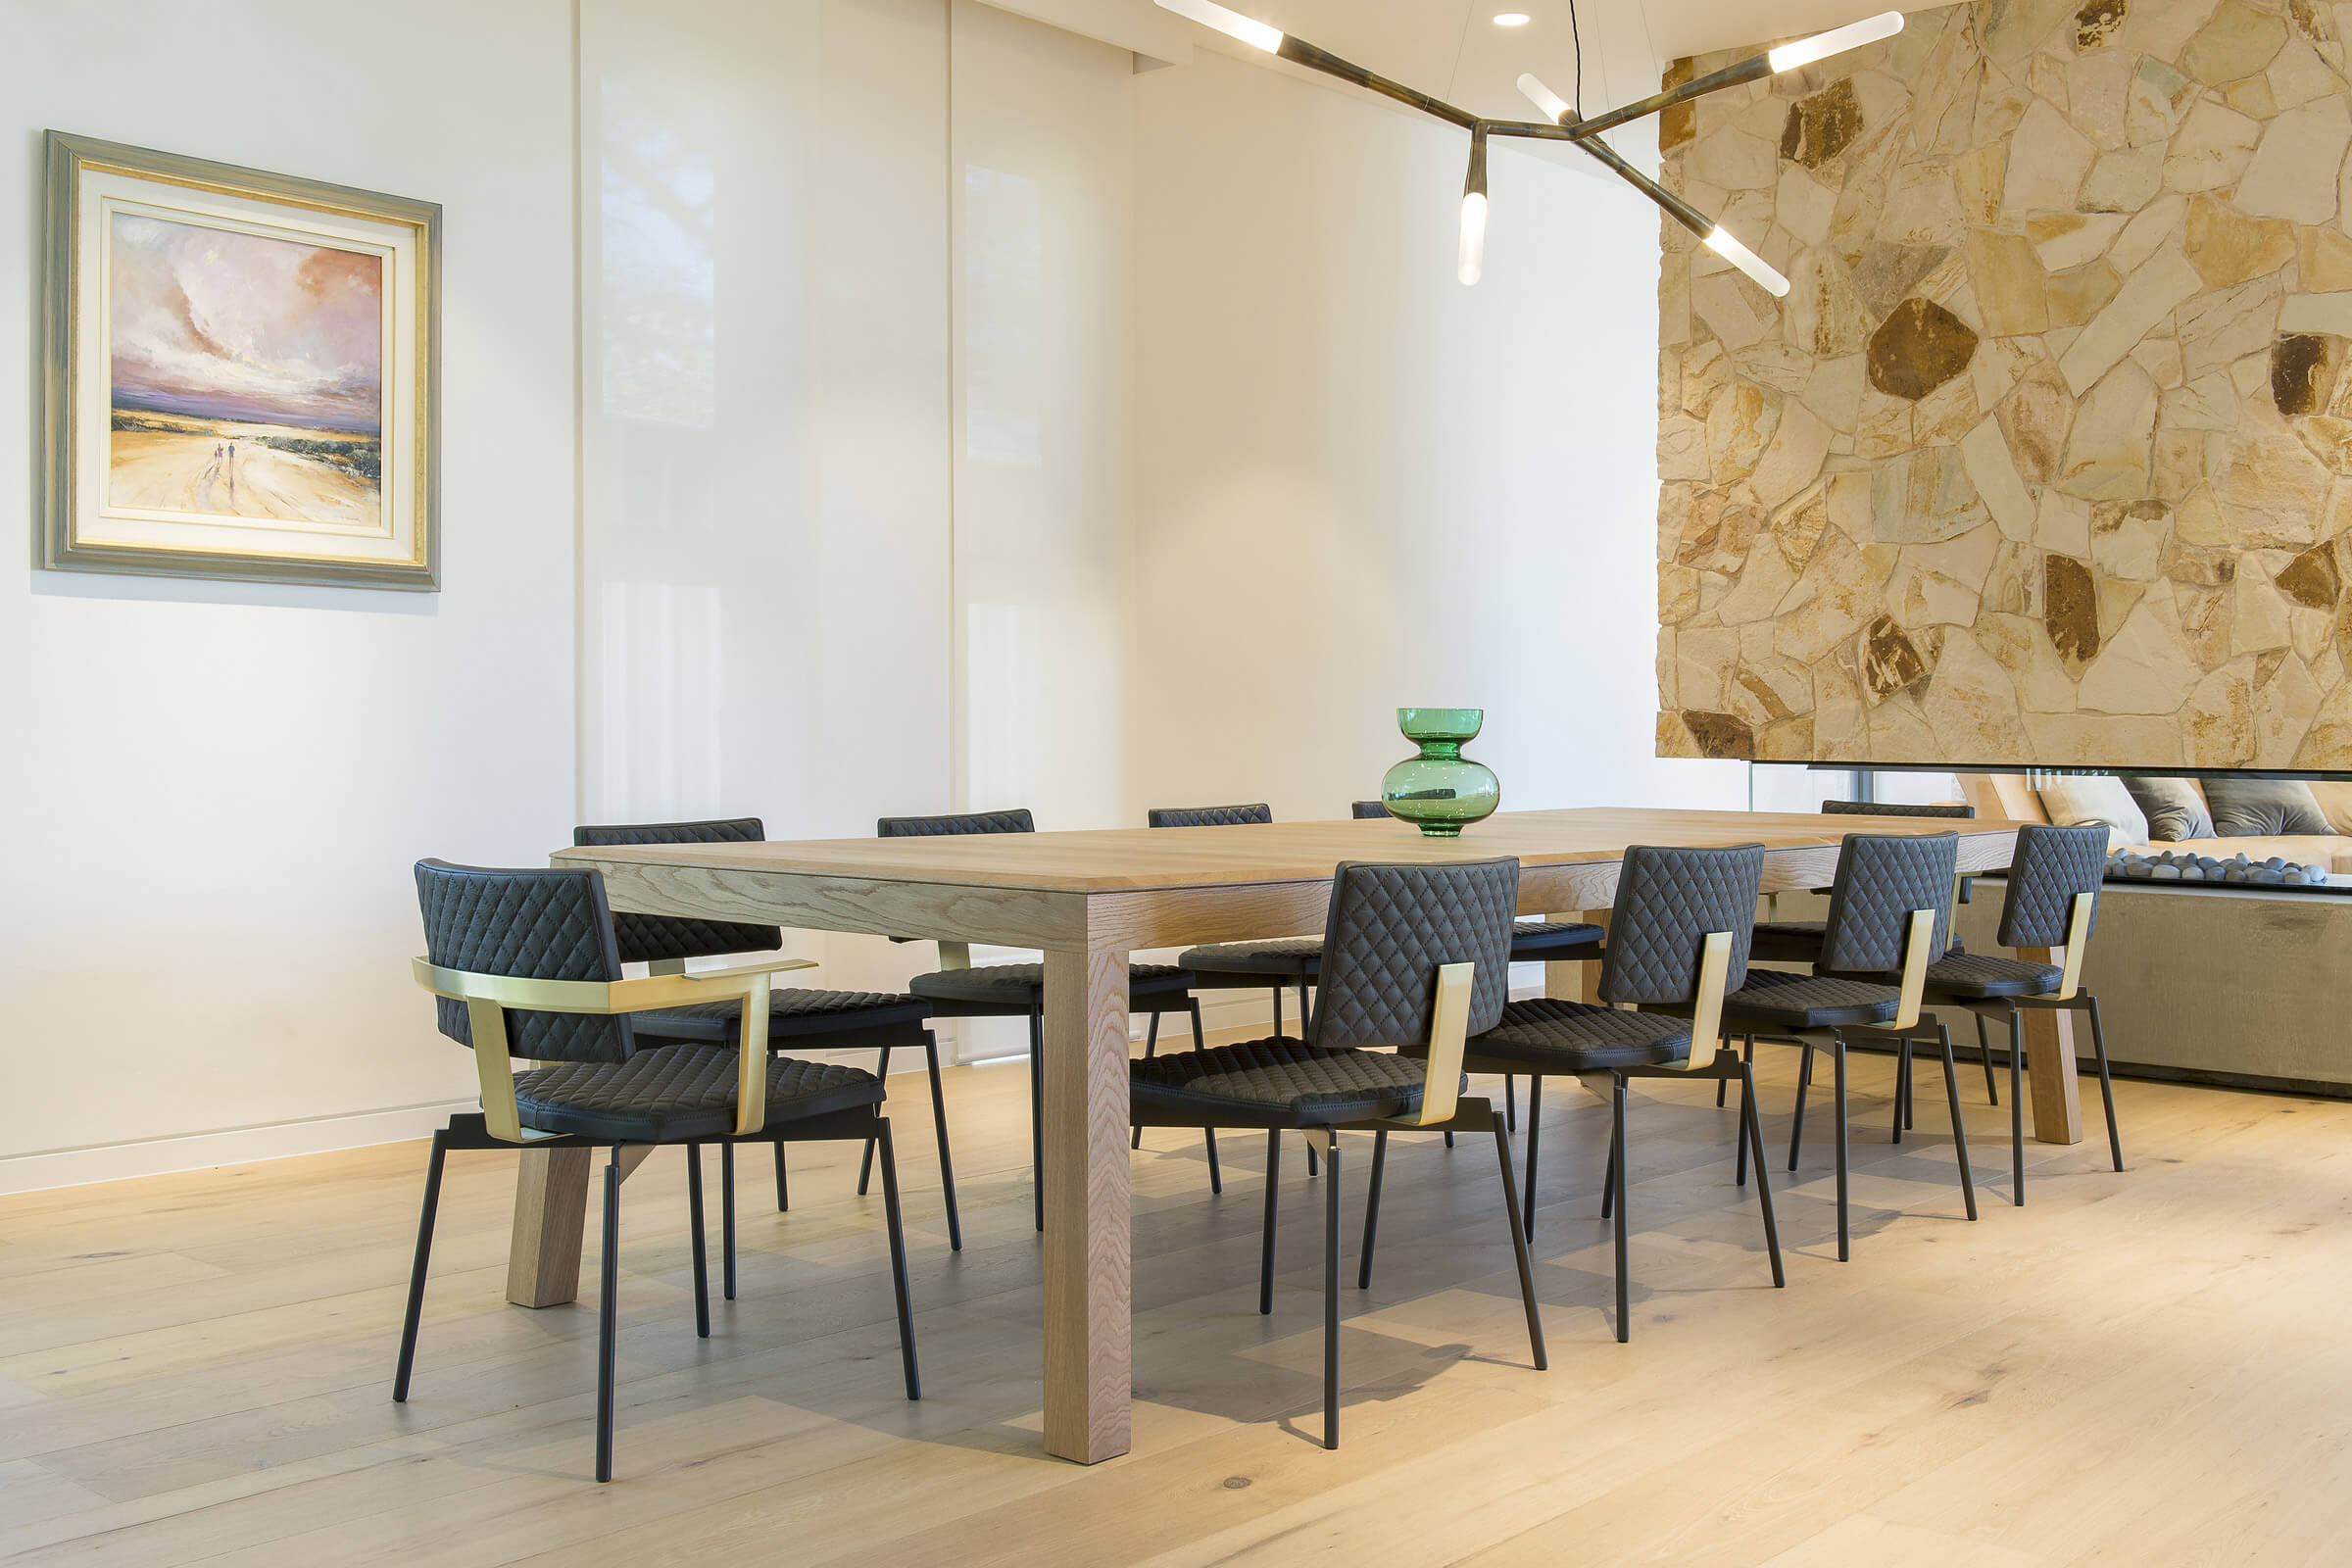 this architectural home in the Adelaide CBD is a joy to experience complemented by the designer dining table and chairs created by Australian designer FrancoCrea as special edition pieces for this family